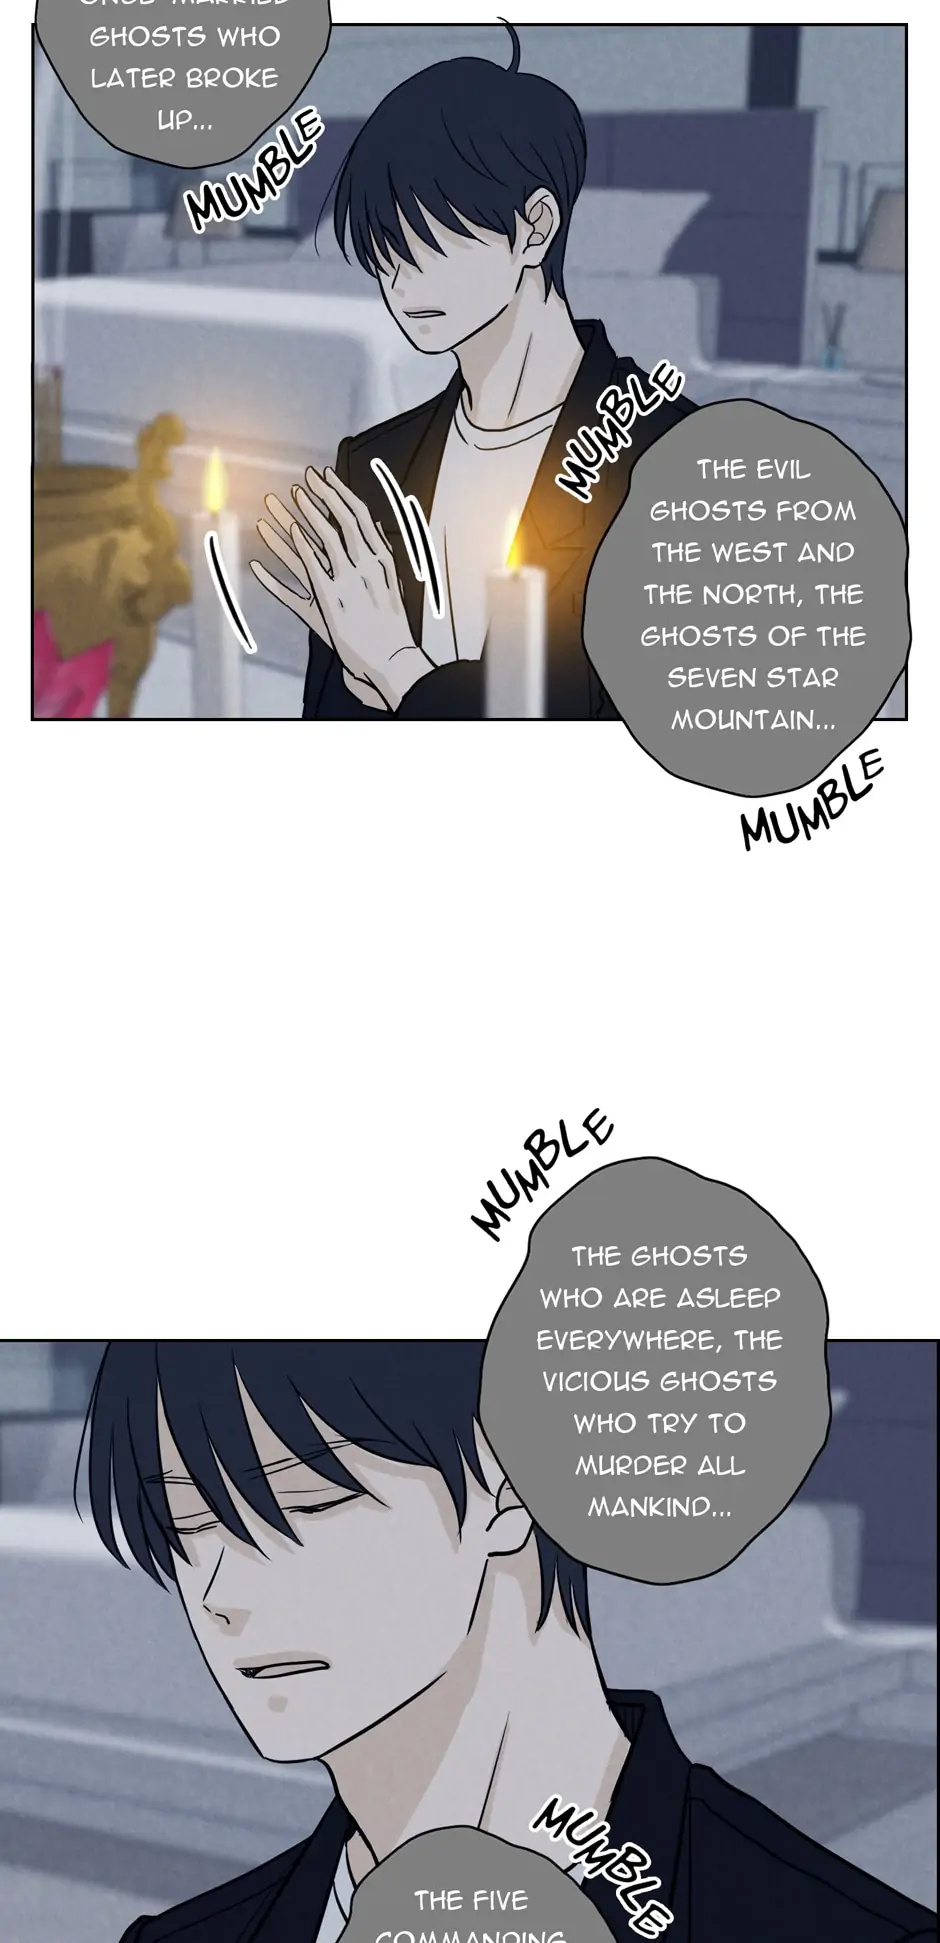 The Groom Disappeared - Page 3